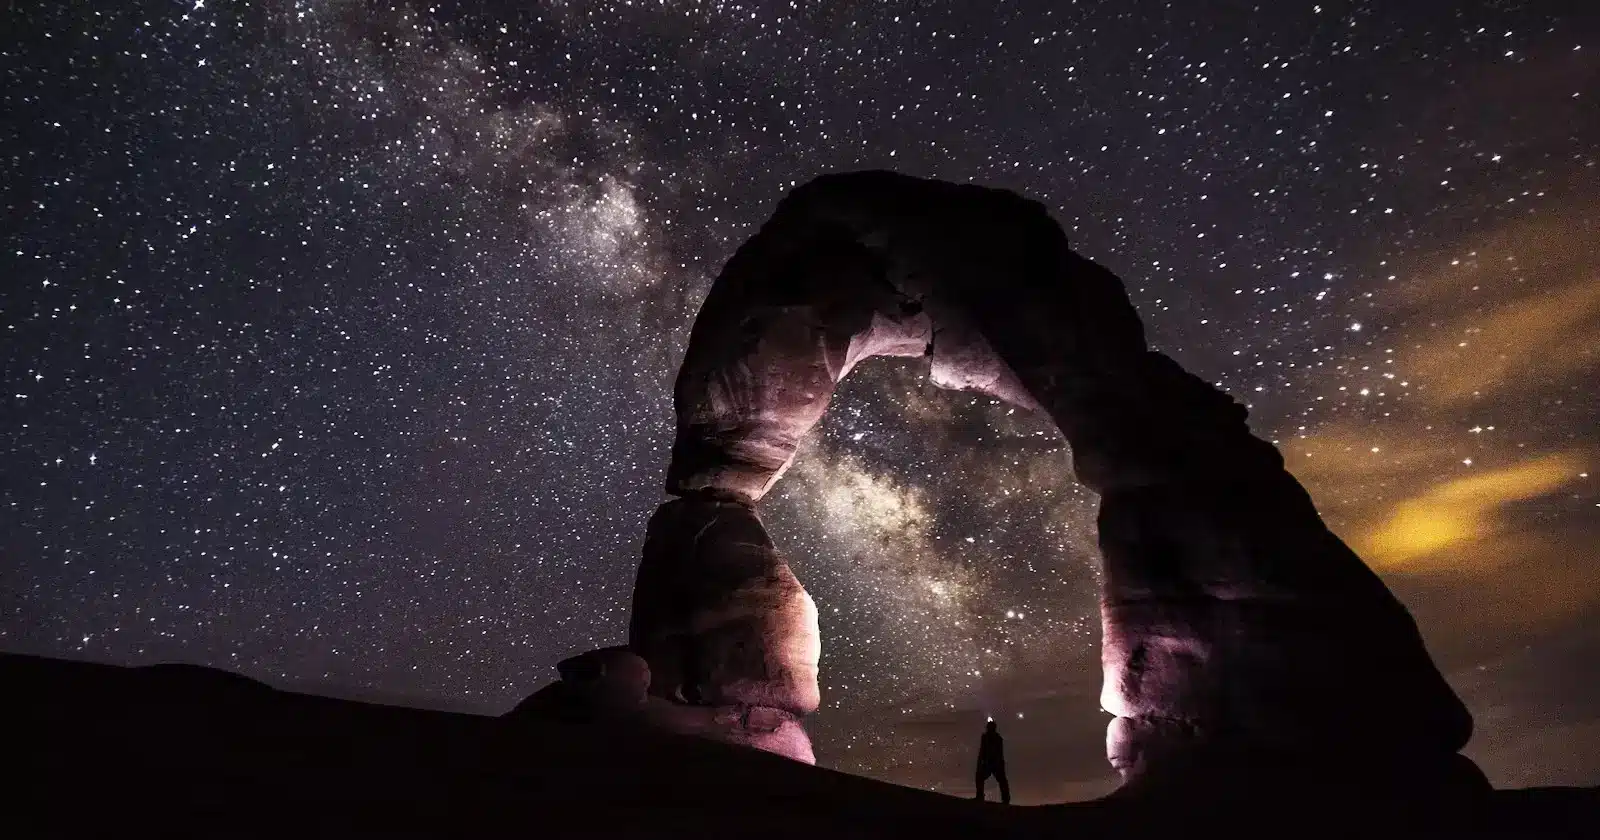 The breathtaking Milky Way shining above Delicate Arch at night, creating a mesmerizing celestial spectacle.